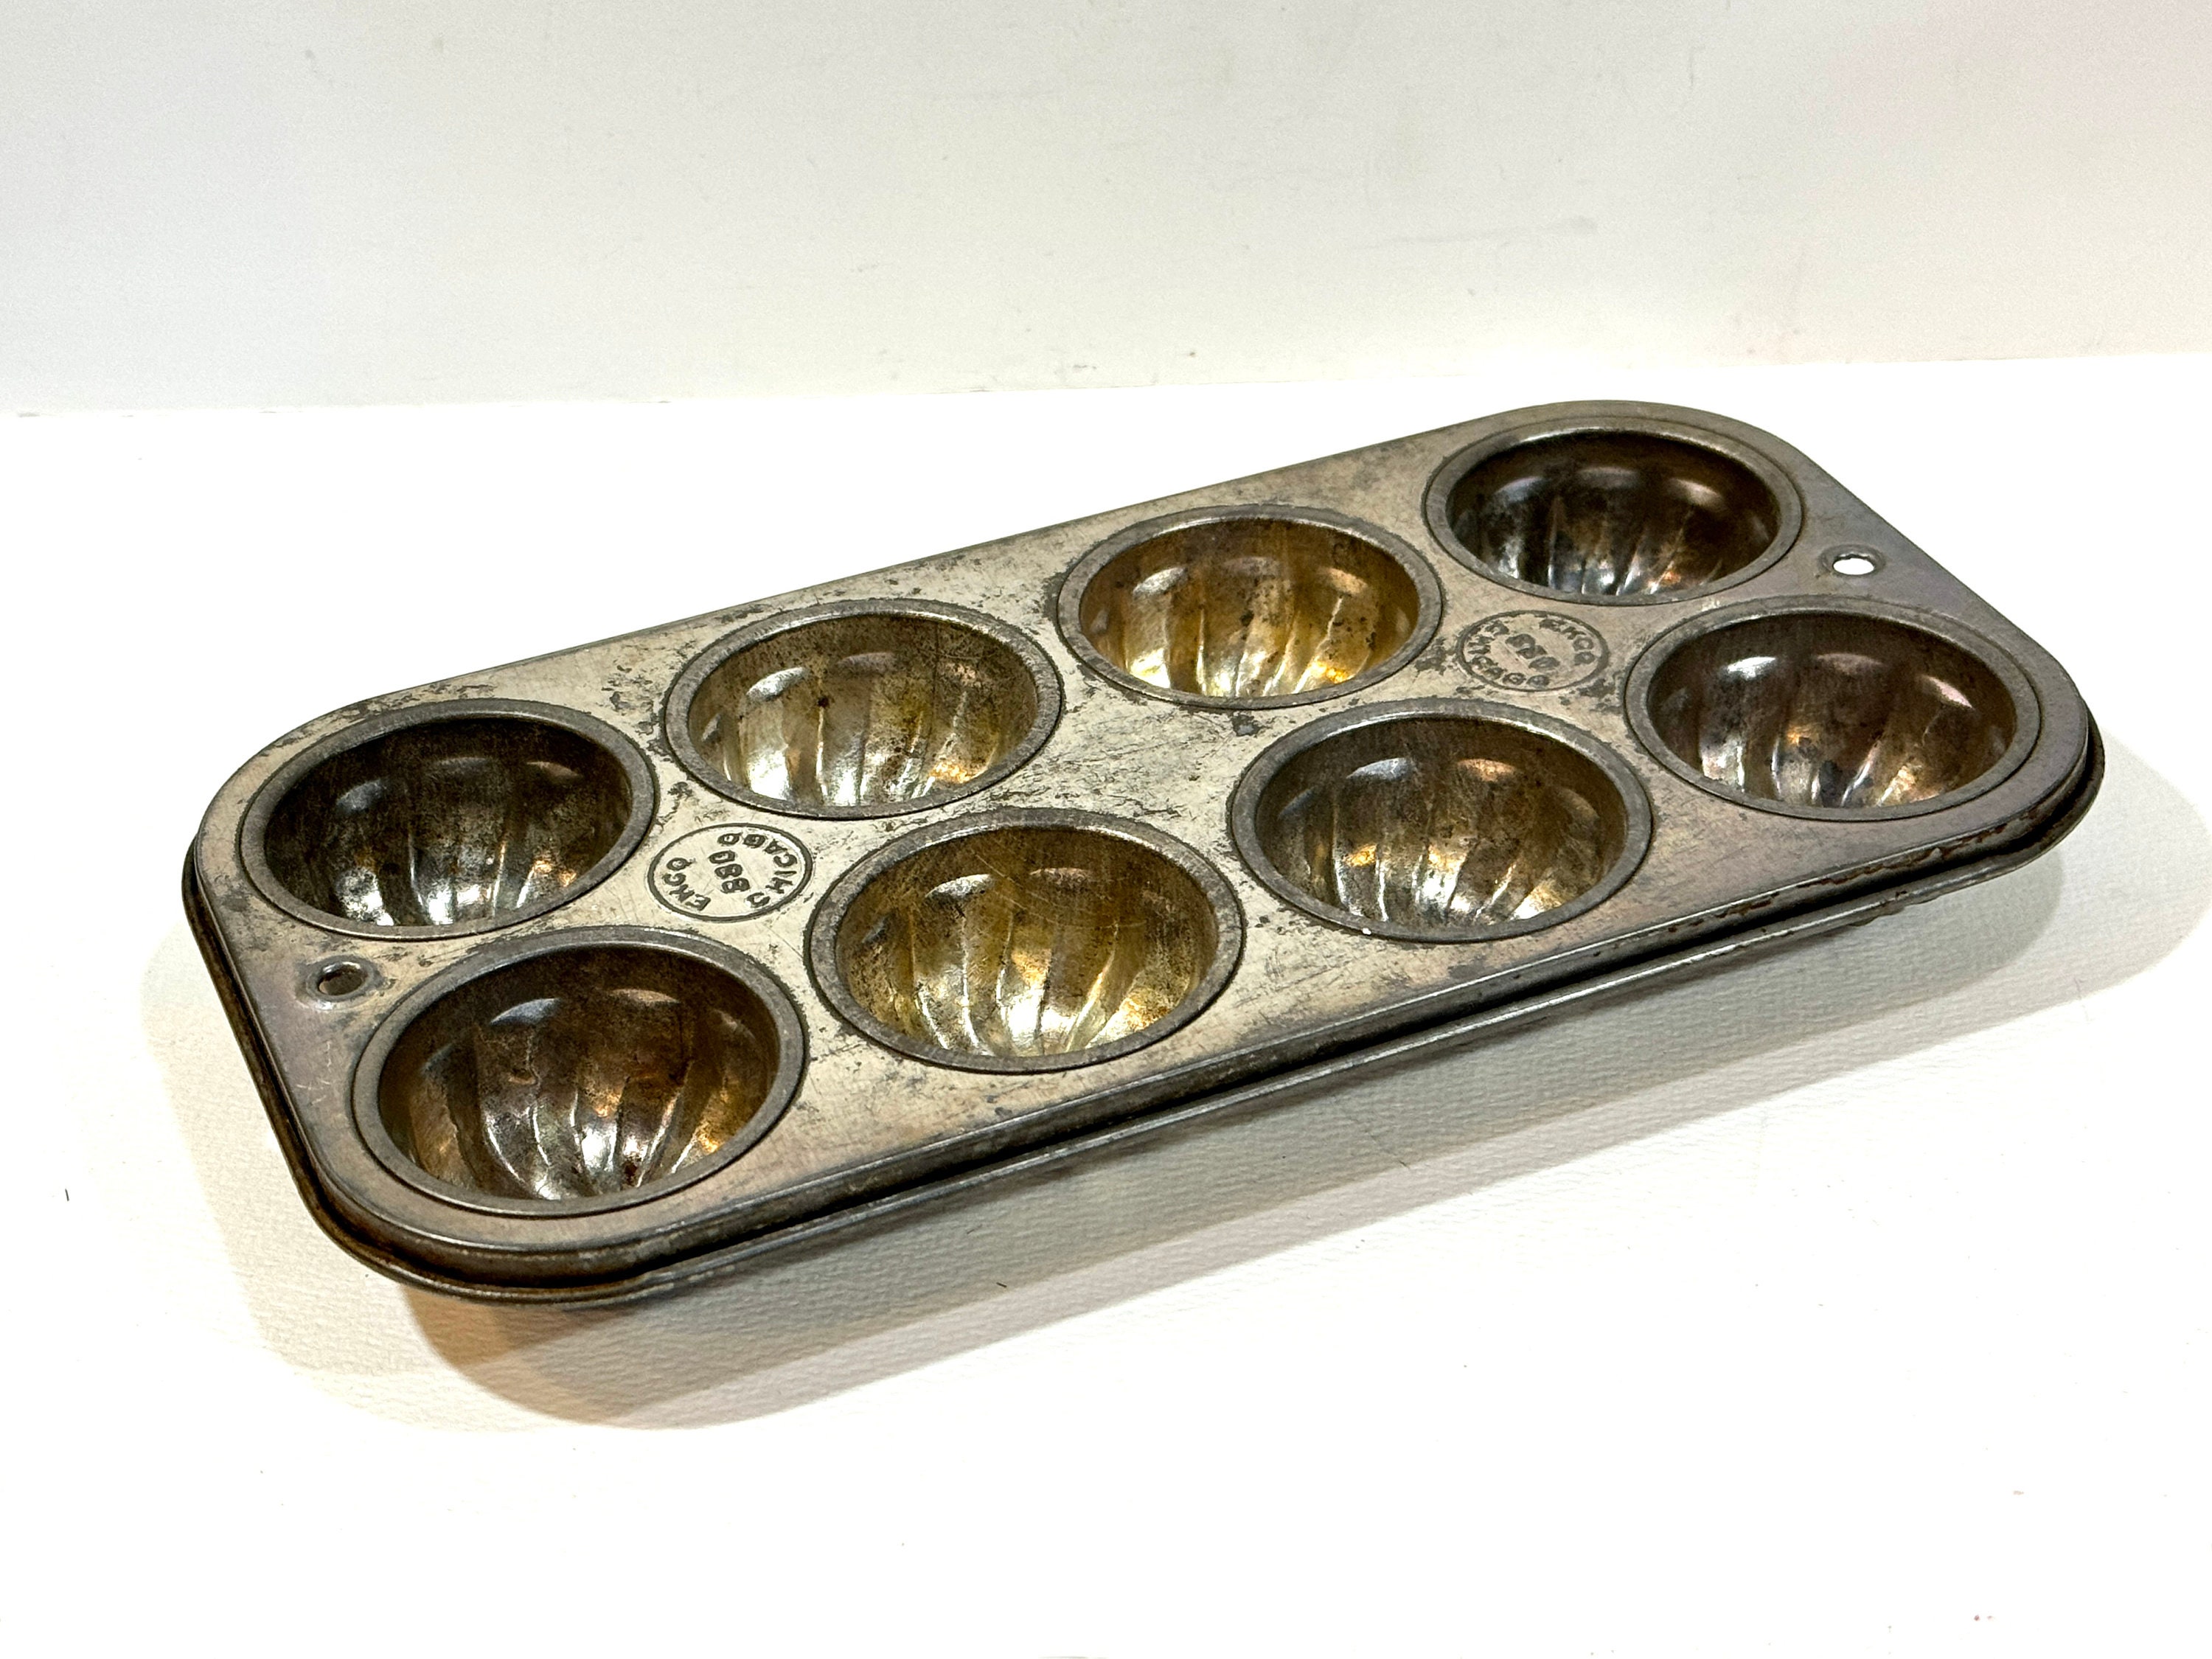 Copper Ceramic Nonstick Solid Aluminum Muffin Pan for 12 Muffins Cupcakes Popovers Yorkshire Puddings